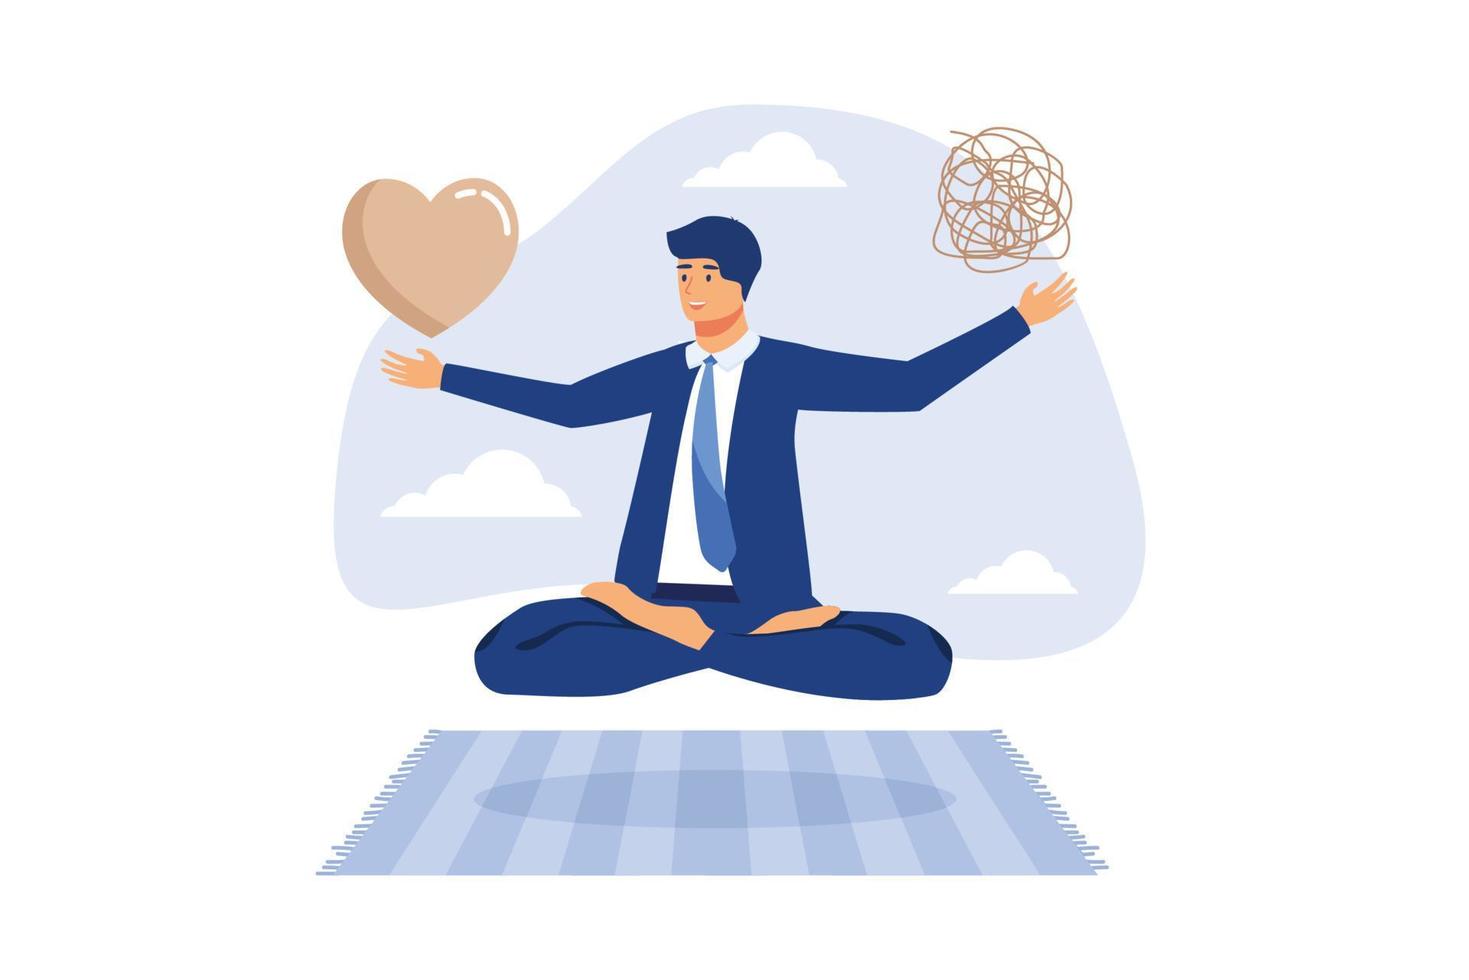 Stress management balance between work concentration and mental health, work life balance or meditation and relax, businessman meditate floating balancing messy chaos and work passion heart shape. vector